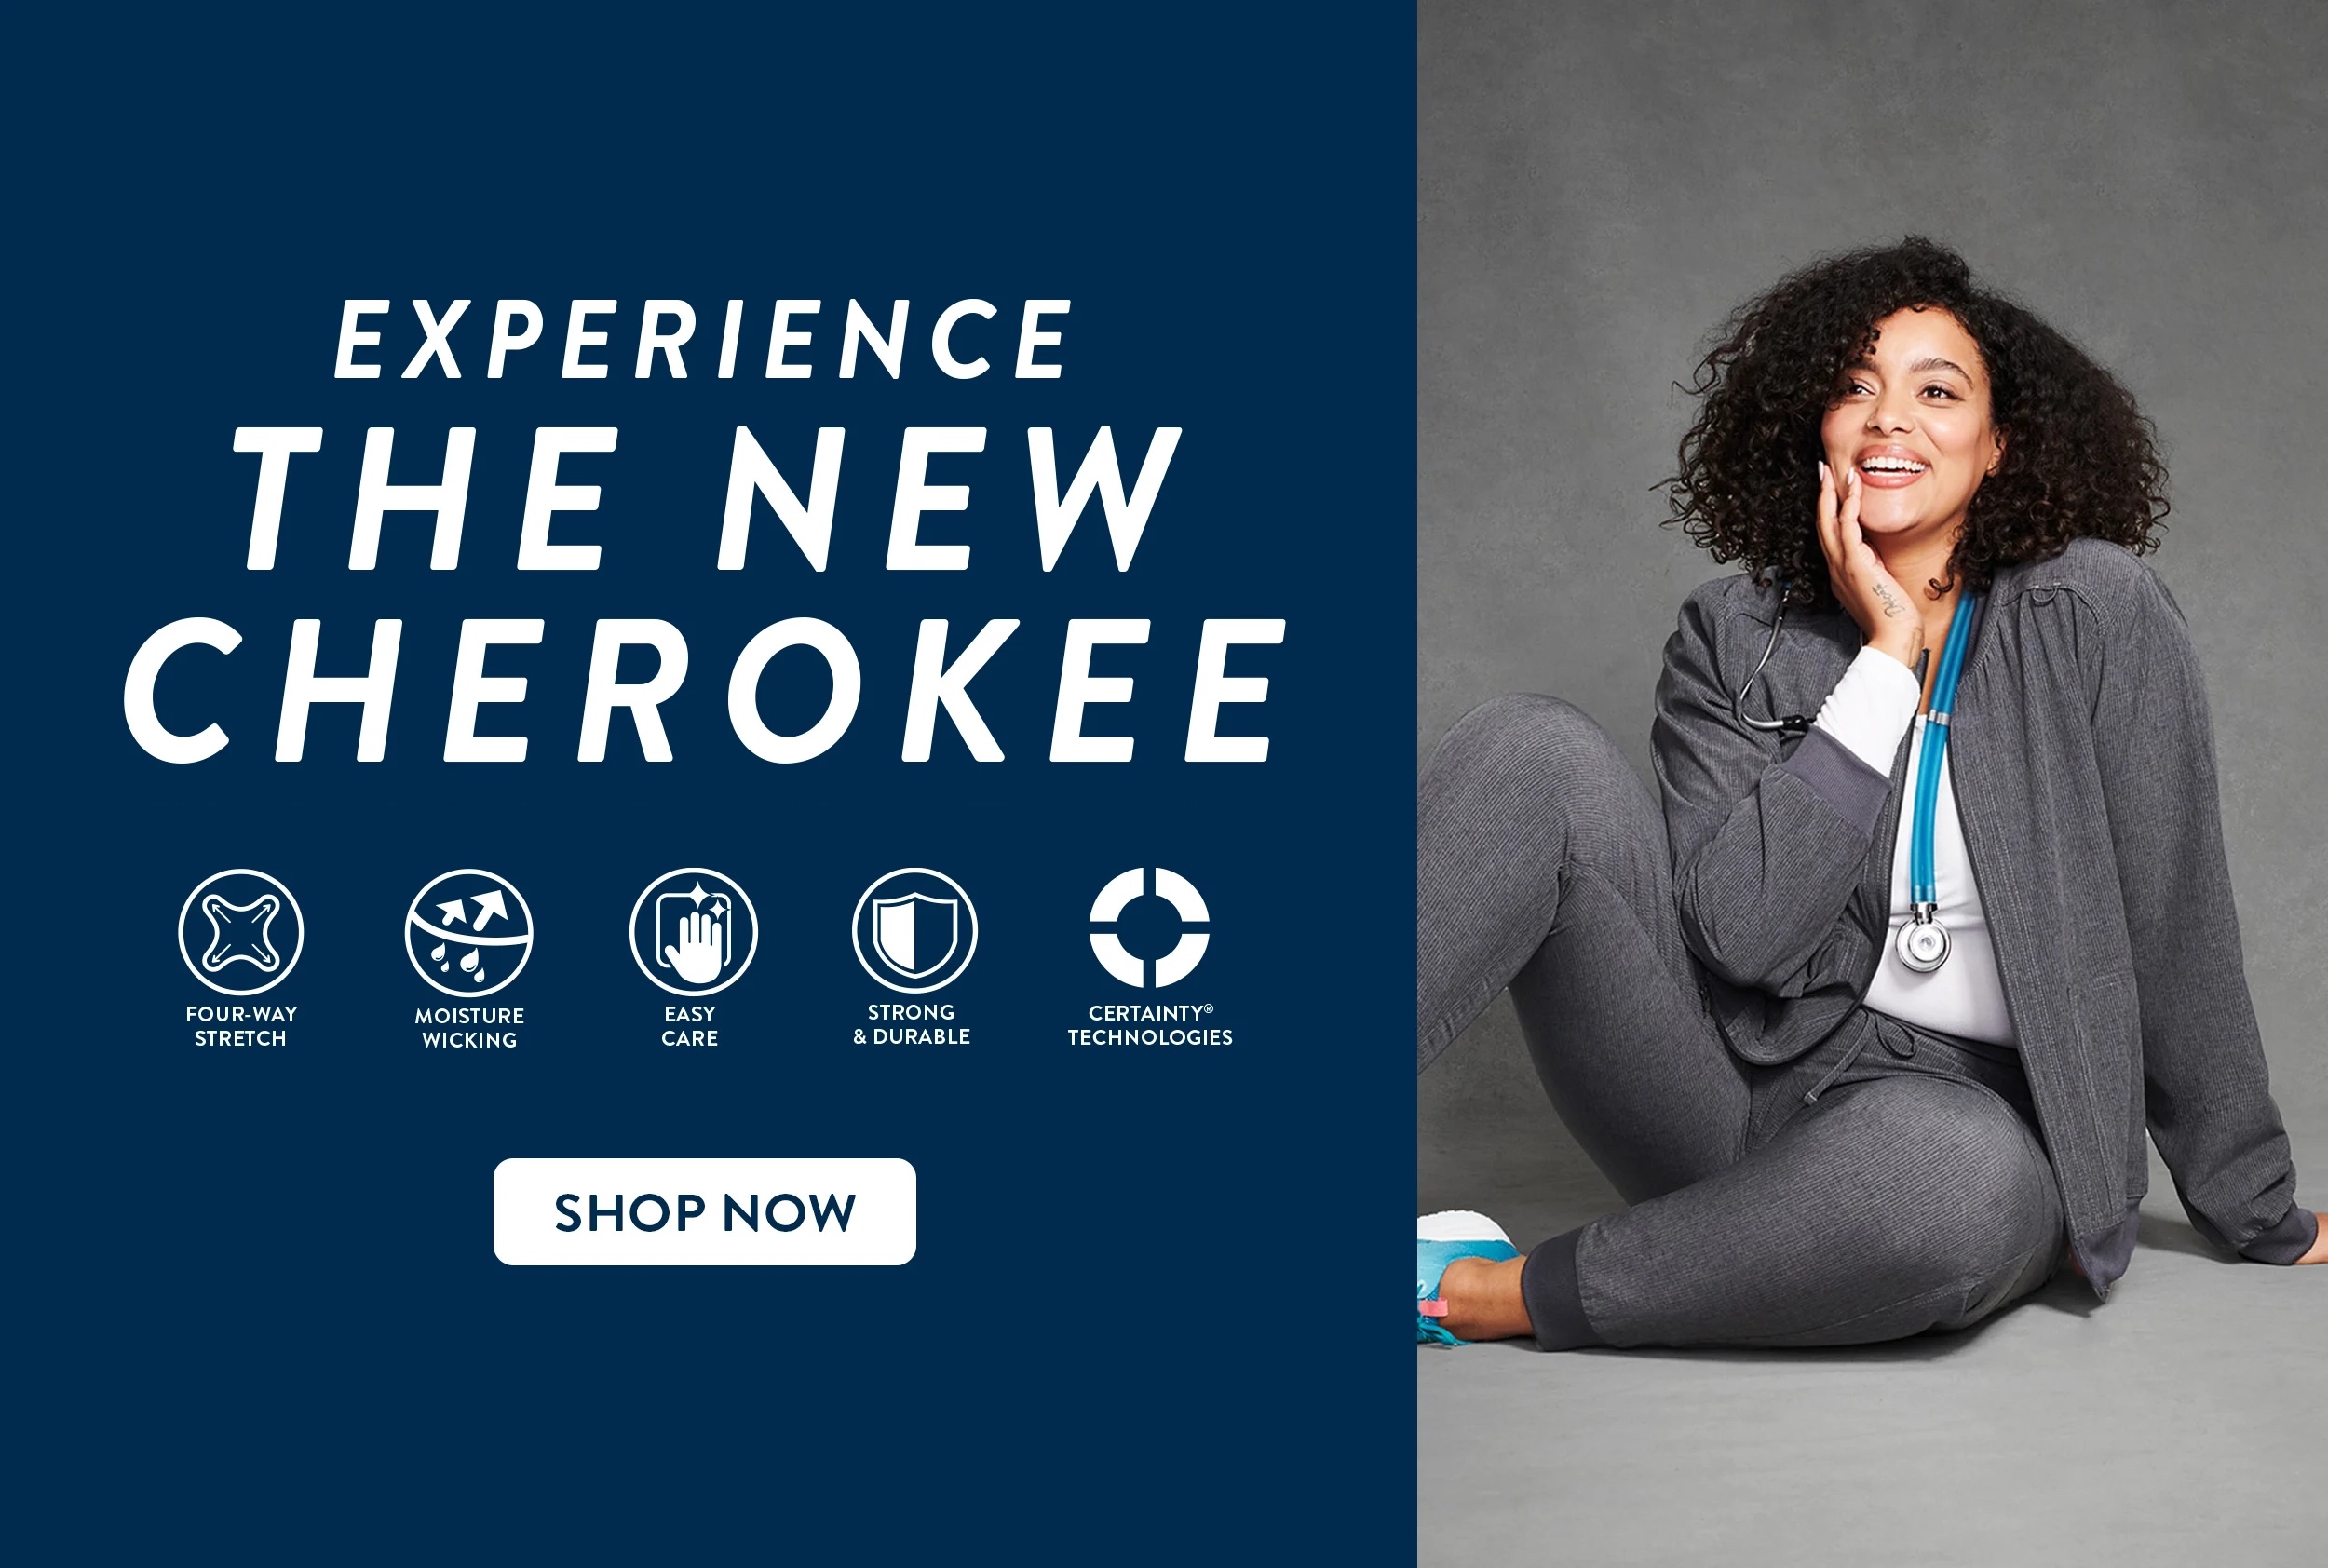  Experience the new Cherokee, Four Way Stretch, Moisture Wicking, Easy Care, Strong & Durable